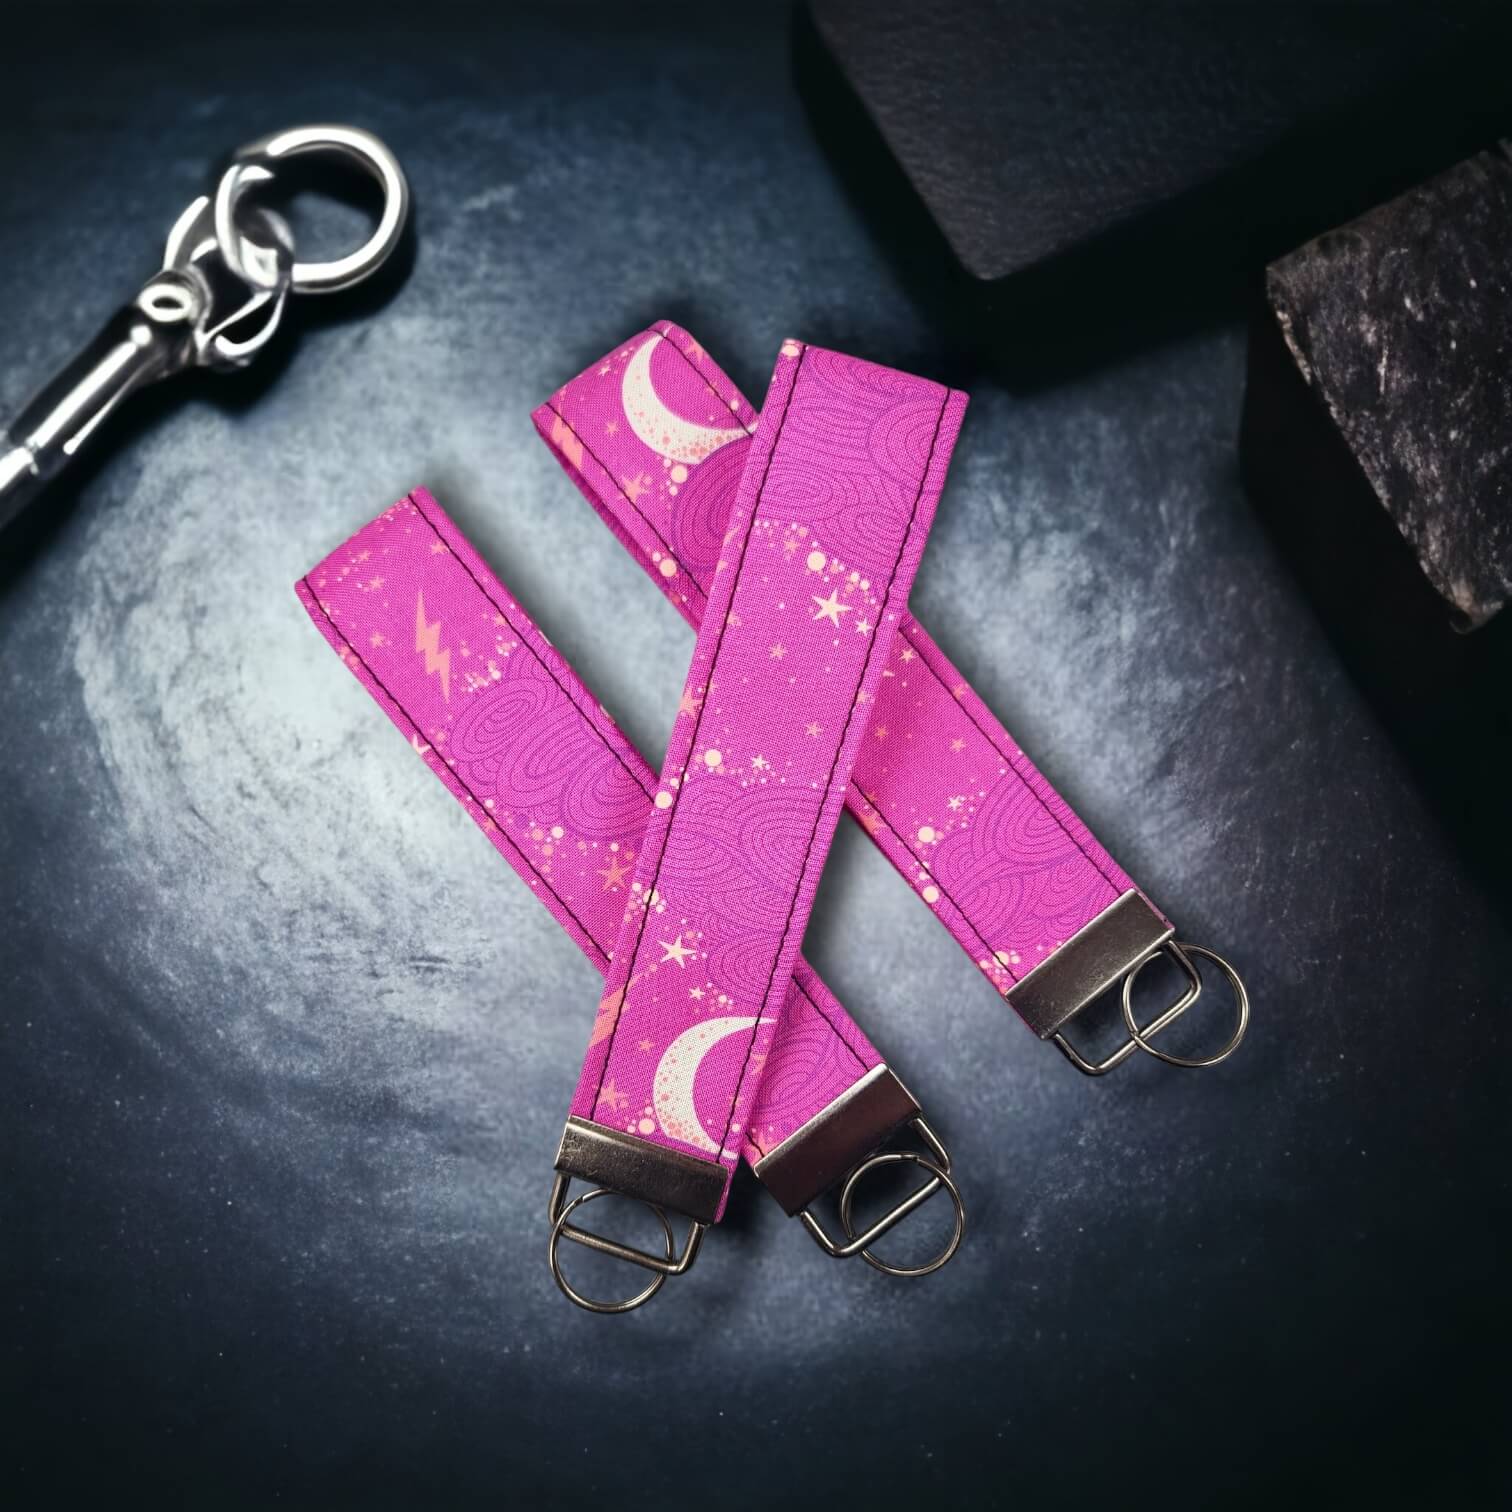 Our key wristlets/fobs in the pattern Pink Moonlight.